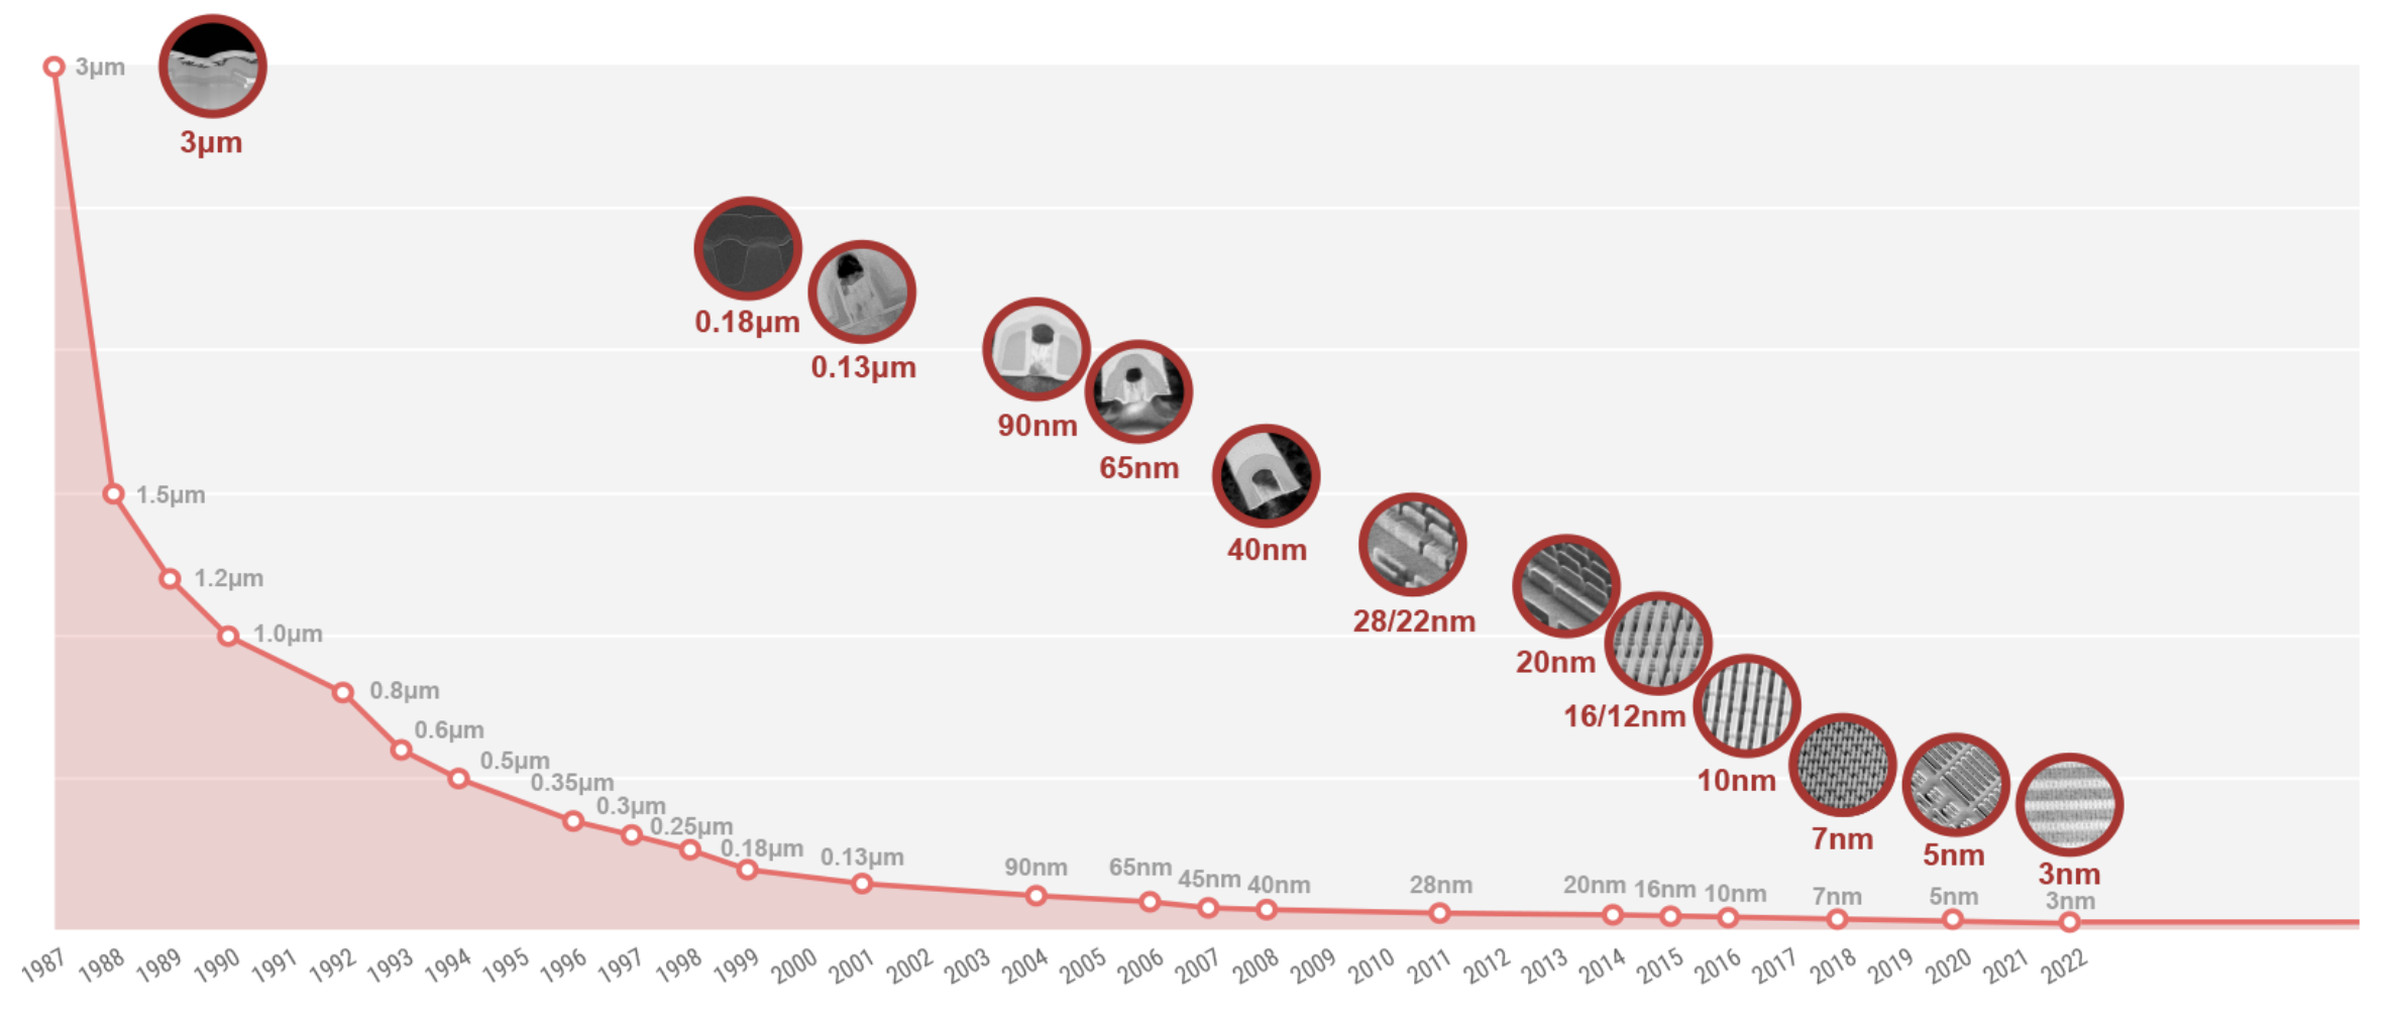 A look at how far, and how fast, TSMC have come.